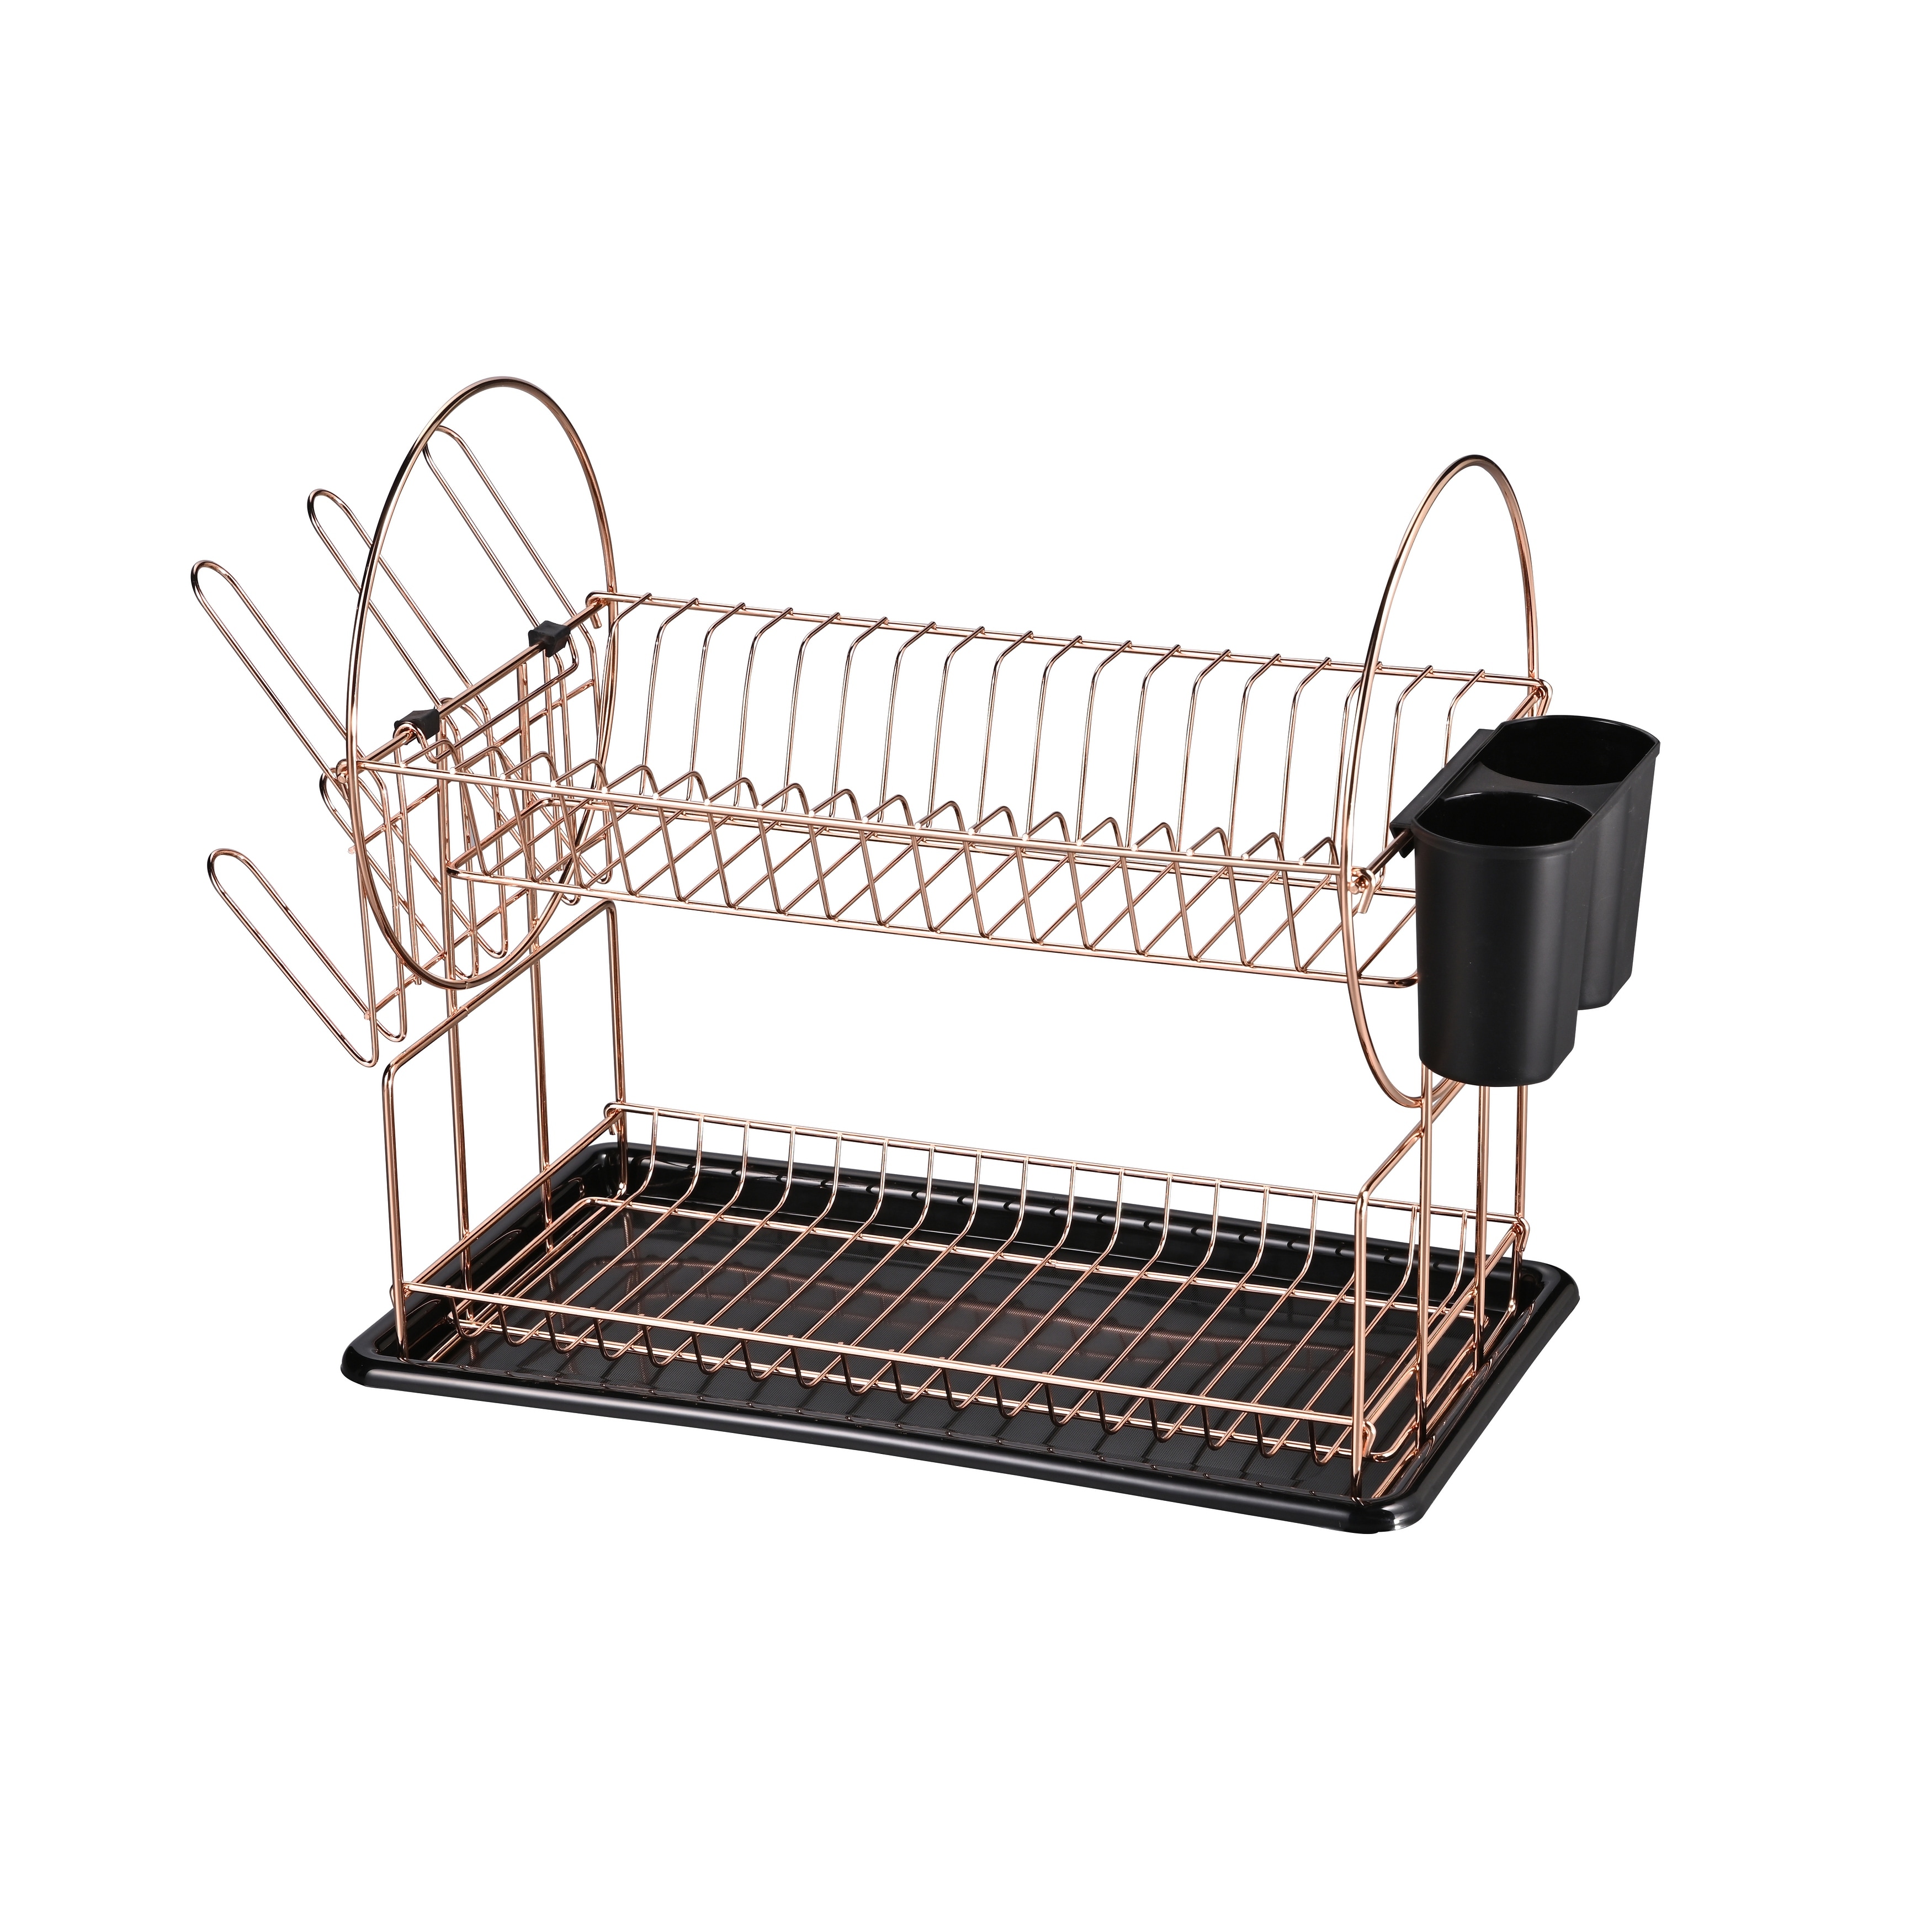 https://ak1.ostkcdn.com/images/products/is/images/direct/39c091f235411496cfa8655e92ce0e0232cb8f8c/Jiallo-Stainless-Steel-2-Tier-dish-rack-with-dripping-tray-%28Rose-Gold%29.jpg